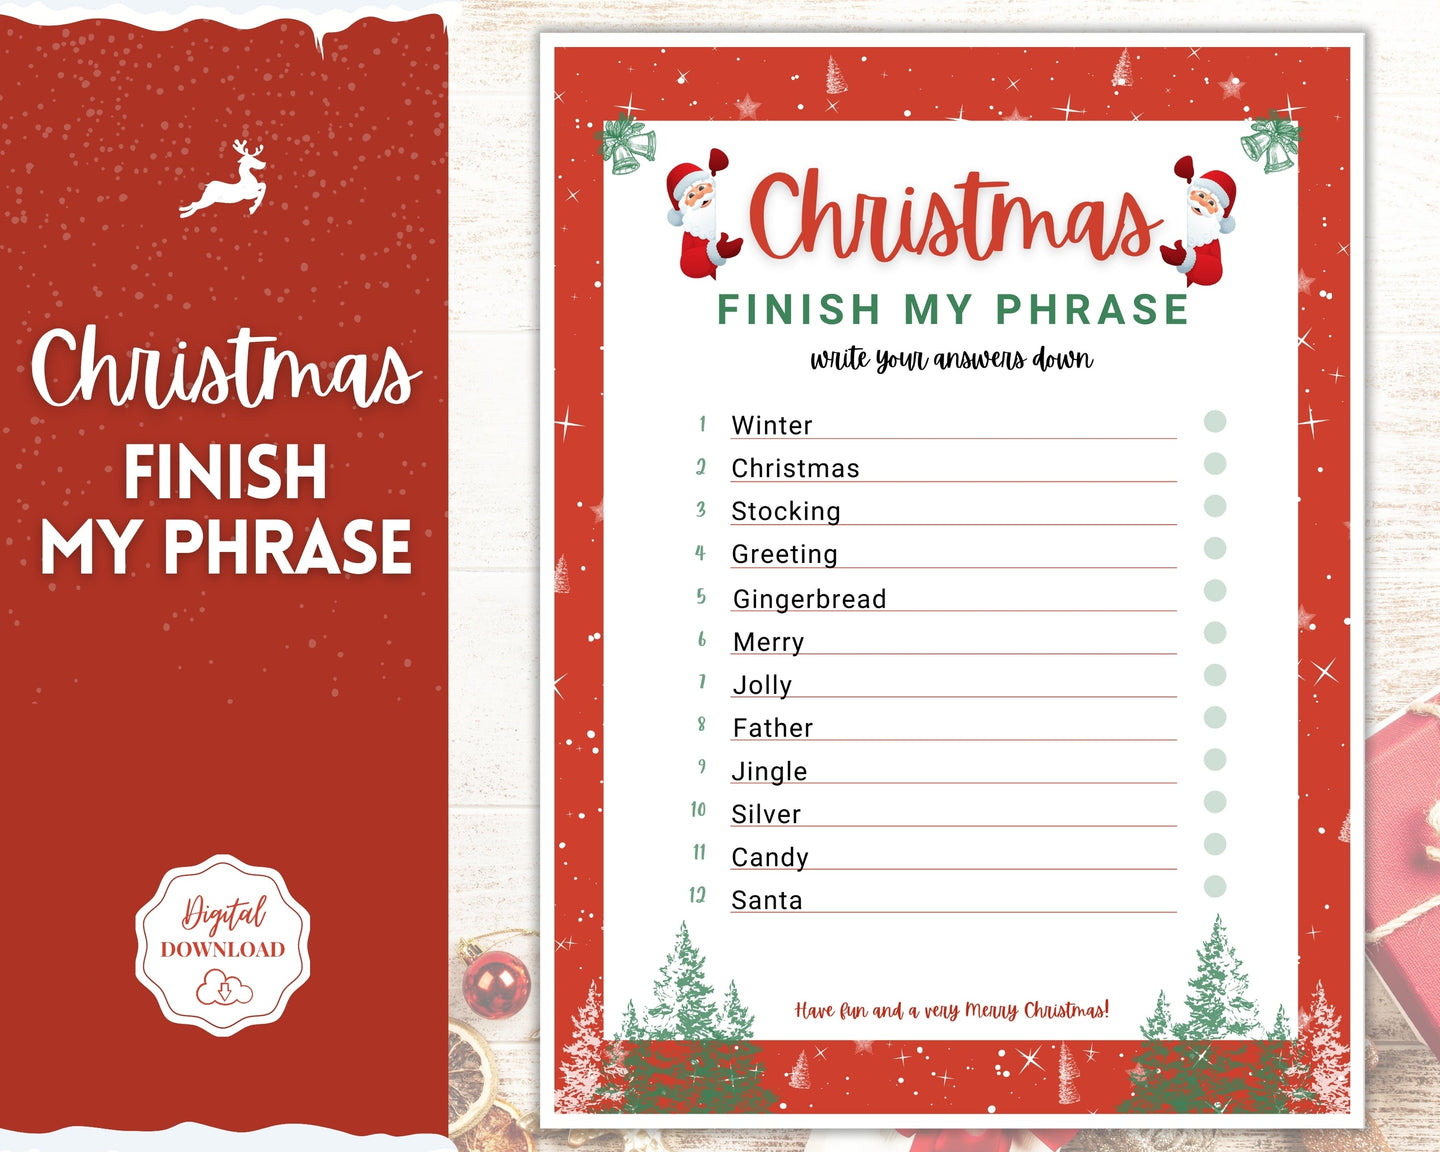 Christmas Finish my Phrase Game! Holiday Game Printables, Xmas Party Game, Fun Family Activity Set, Virtual, Kids Adults, Office Party, Quiz